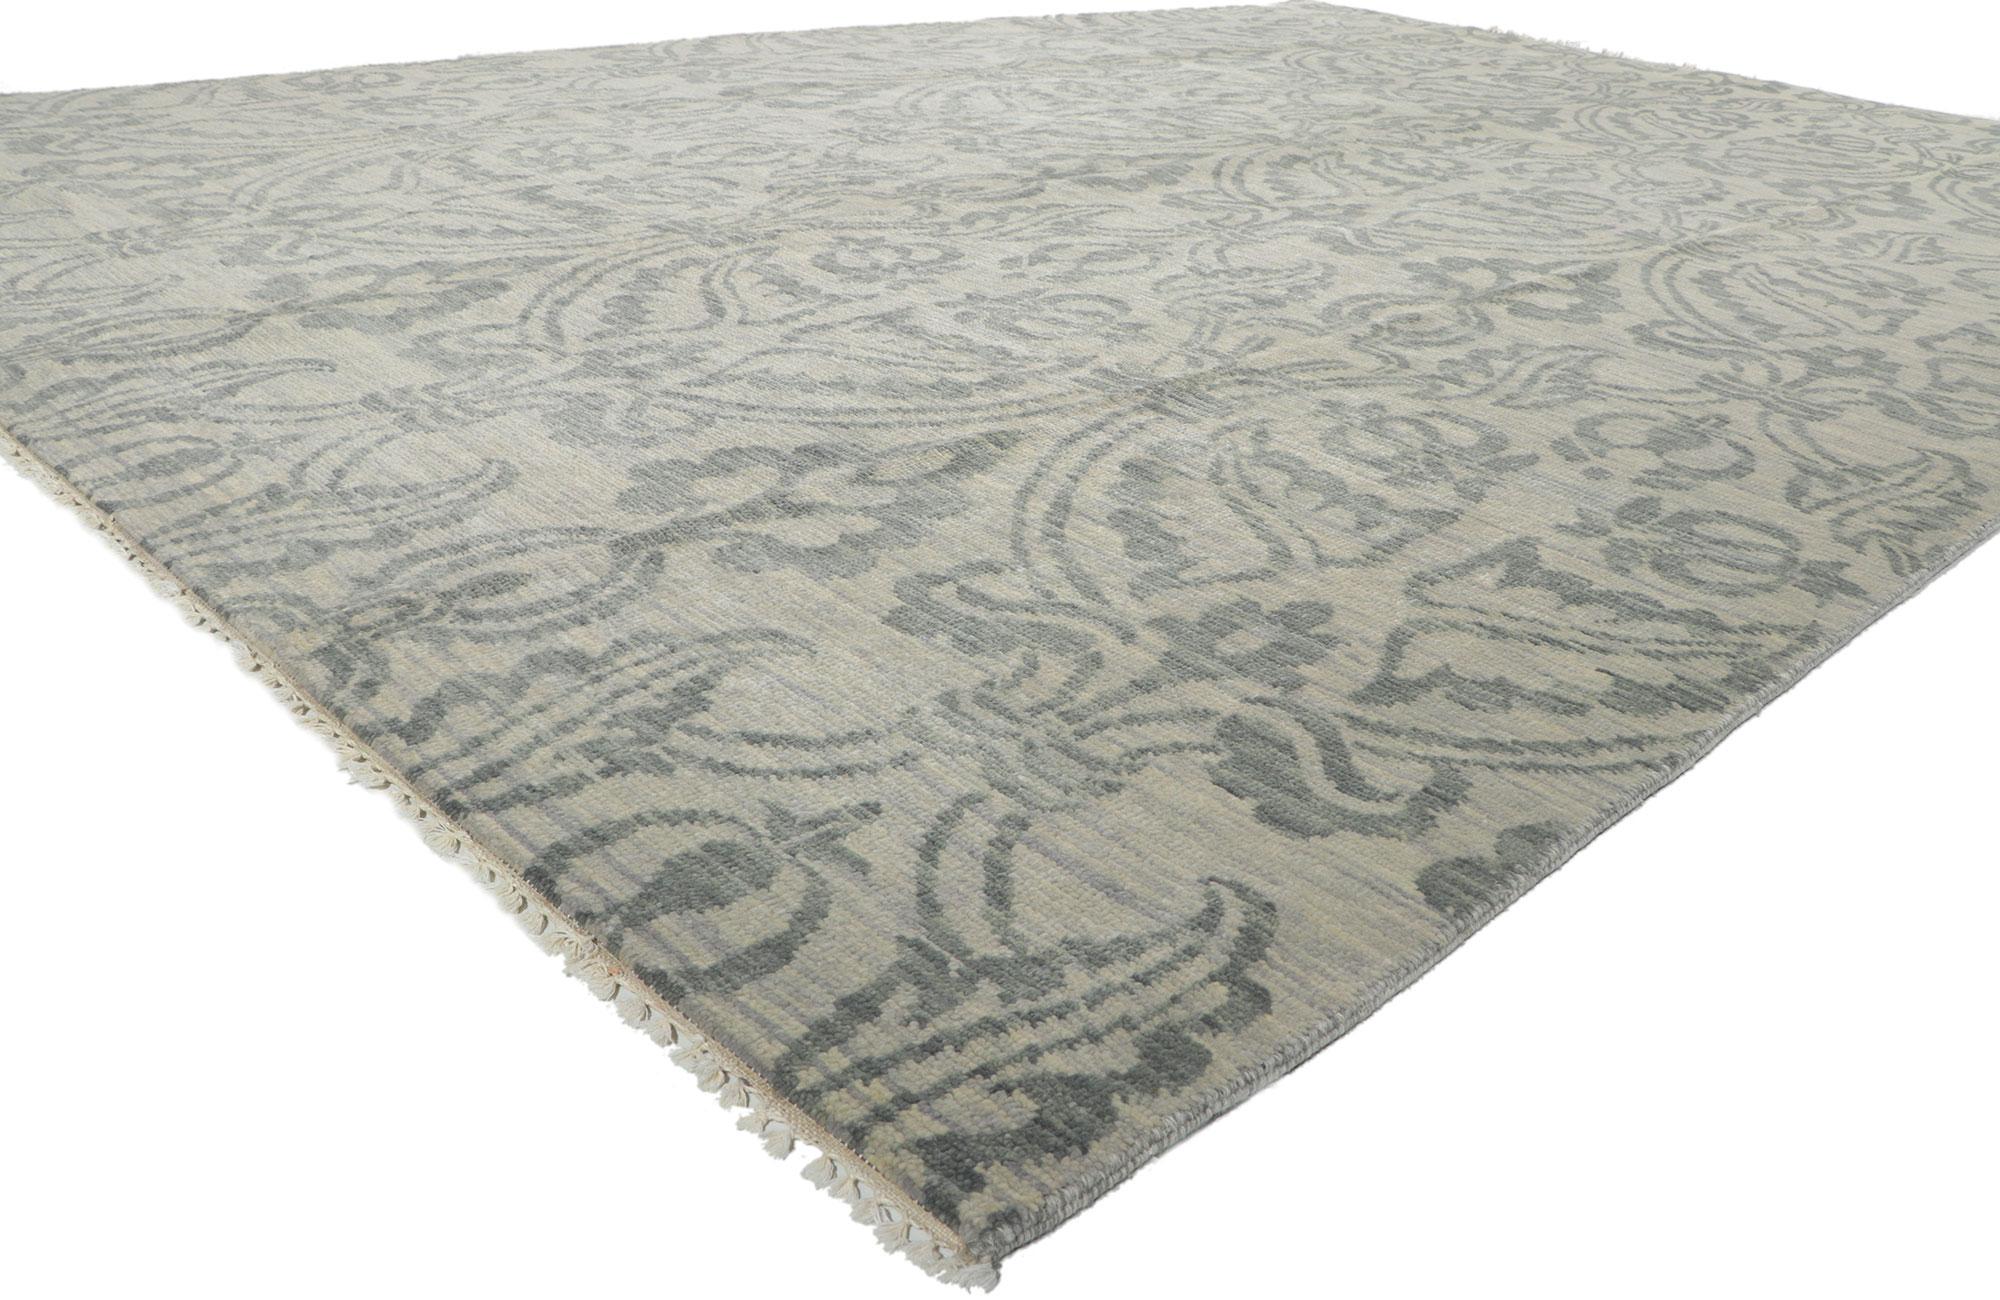 30265 New Transitional Ikat Rug, 09'09 X 14'00. Emanating transitional style with incredible detail and texture, this hand knotted wool Ikat rug from India is a captivating vision of woven beauty. The eye-catching ikat design and earthy colorway